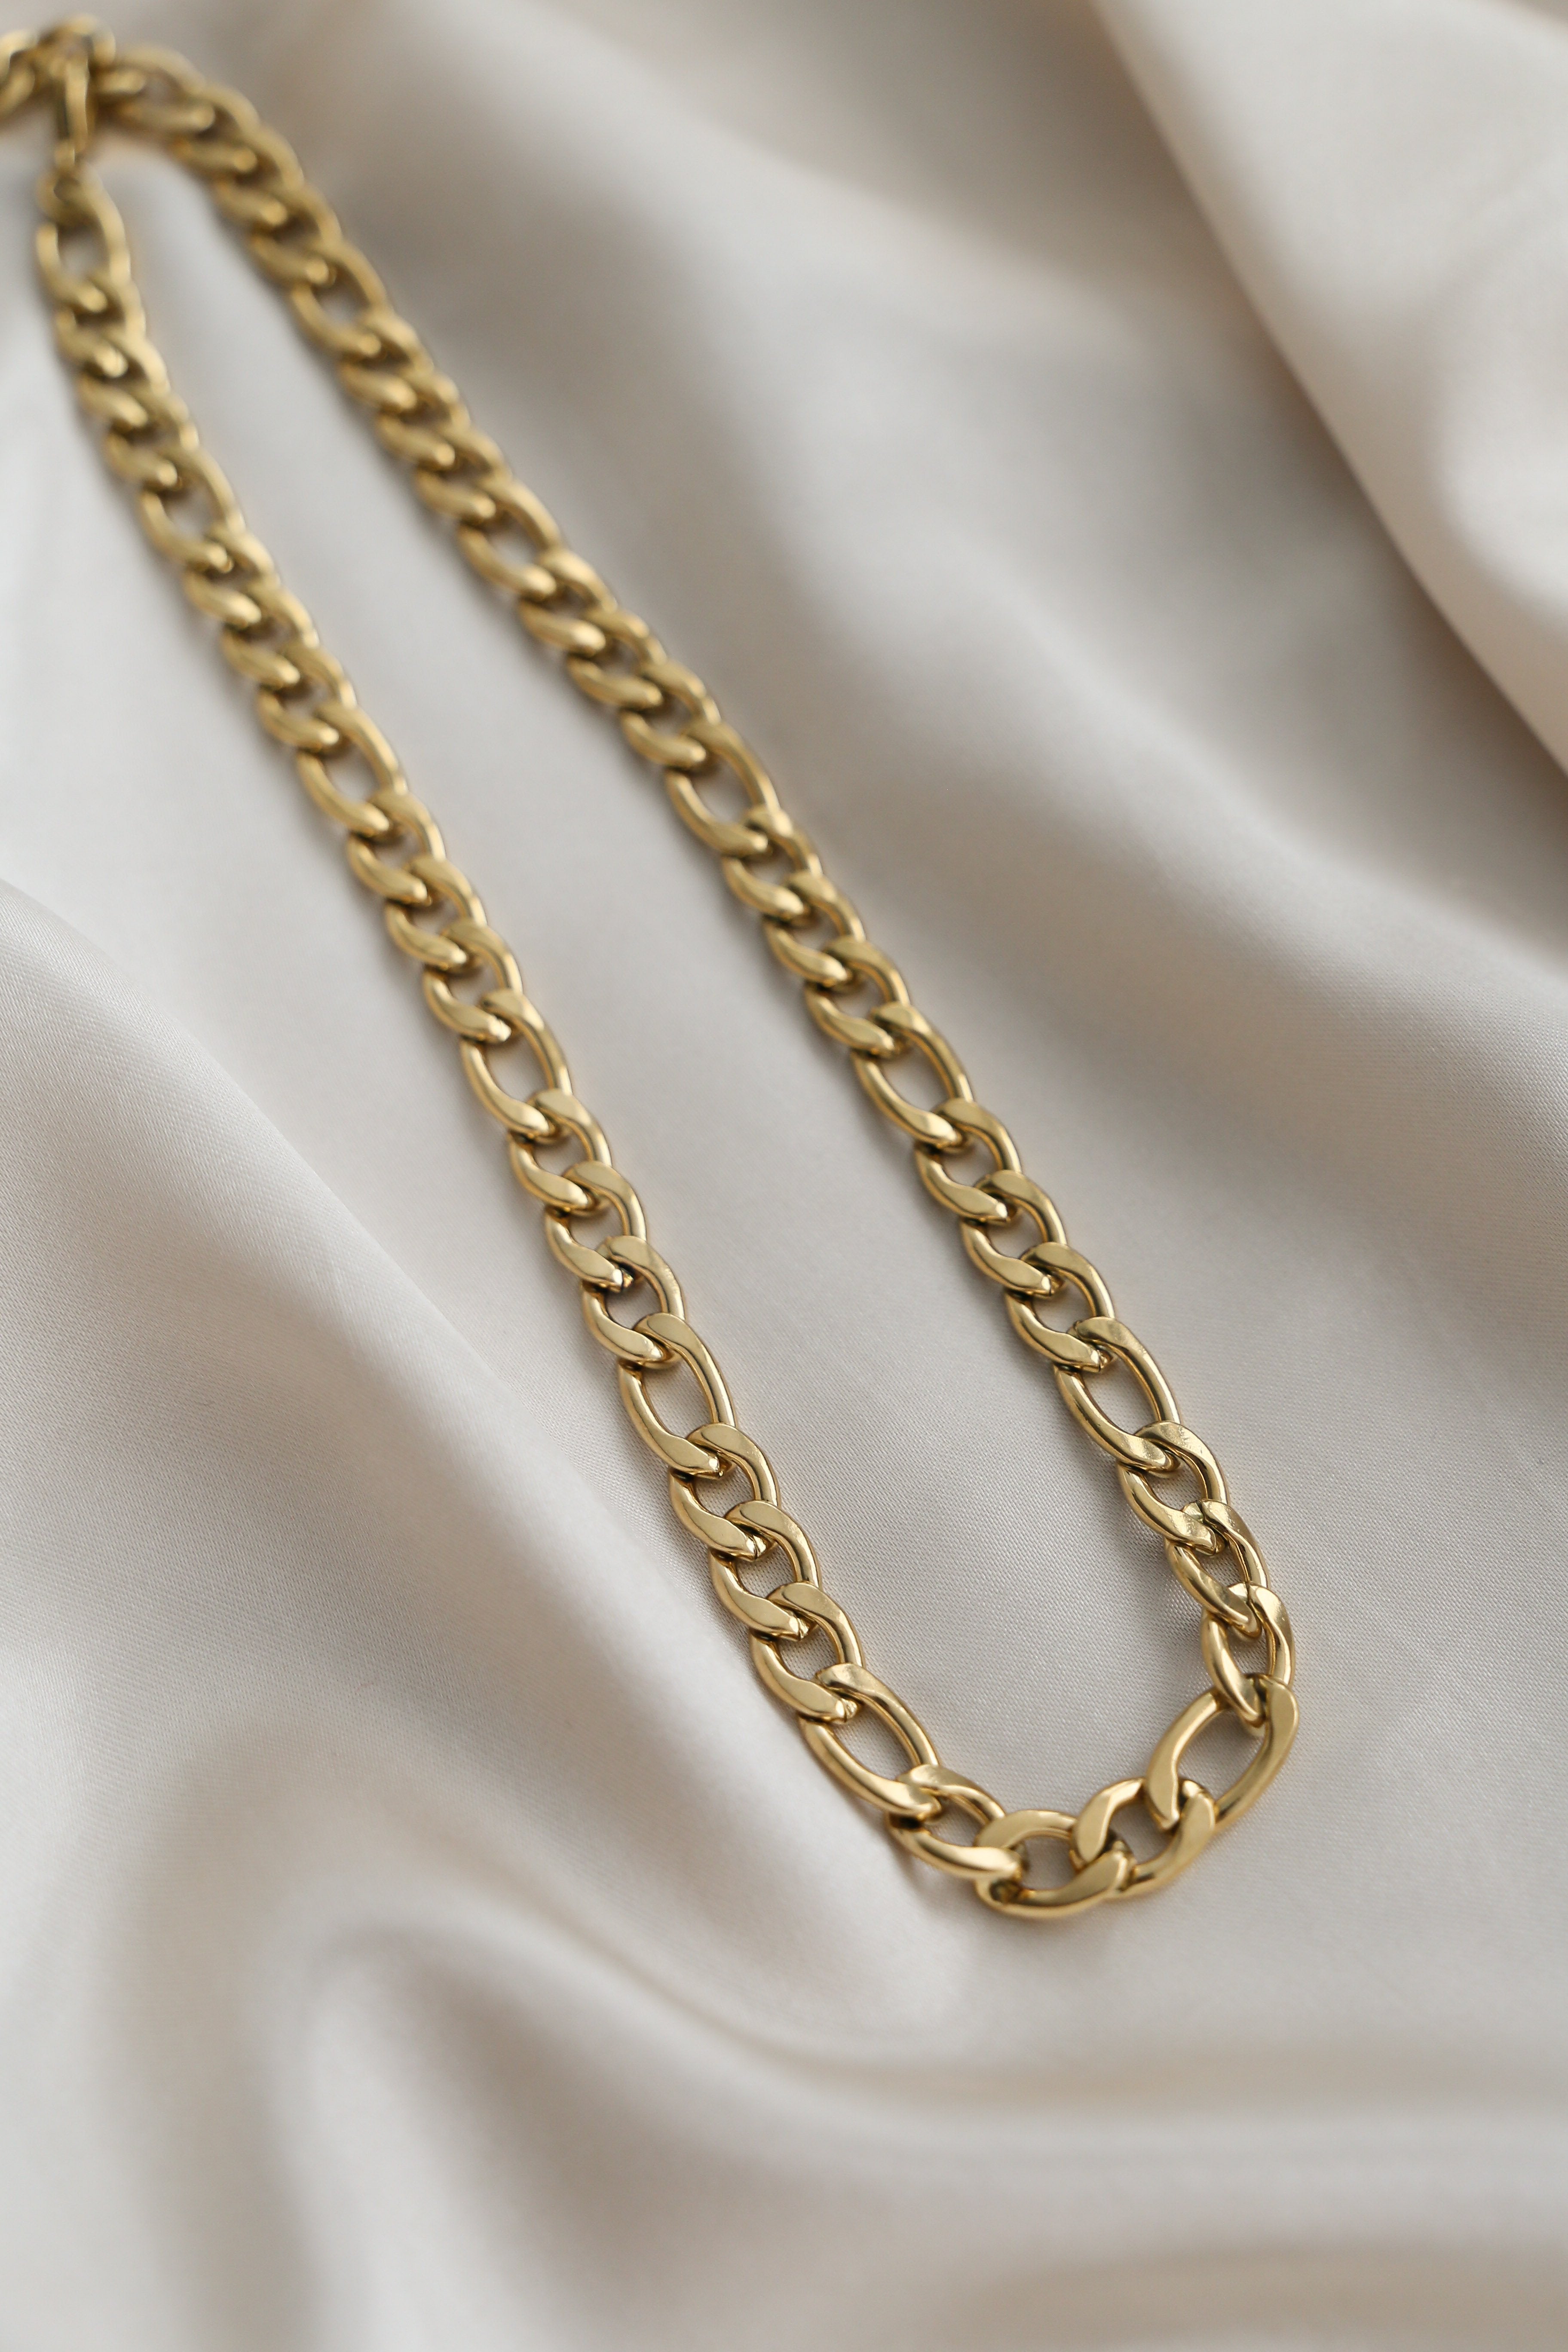 Palermo Necklace - Boutique Minimaliste has waterproof, durable, elegant and vintage inspired jewelry